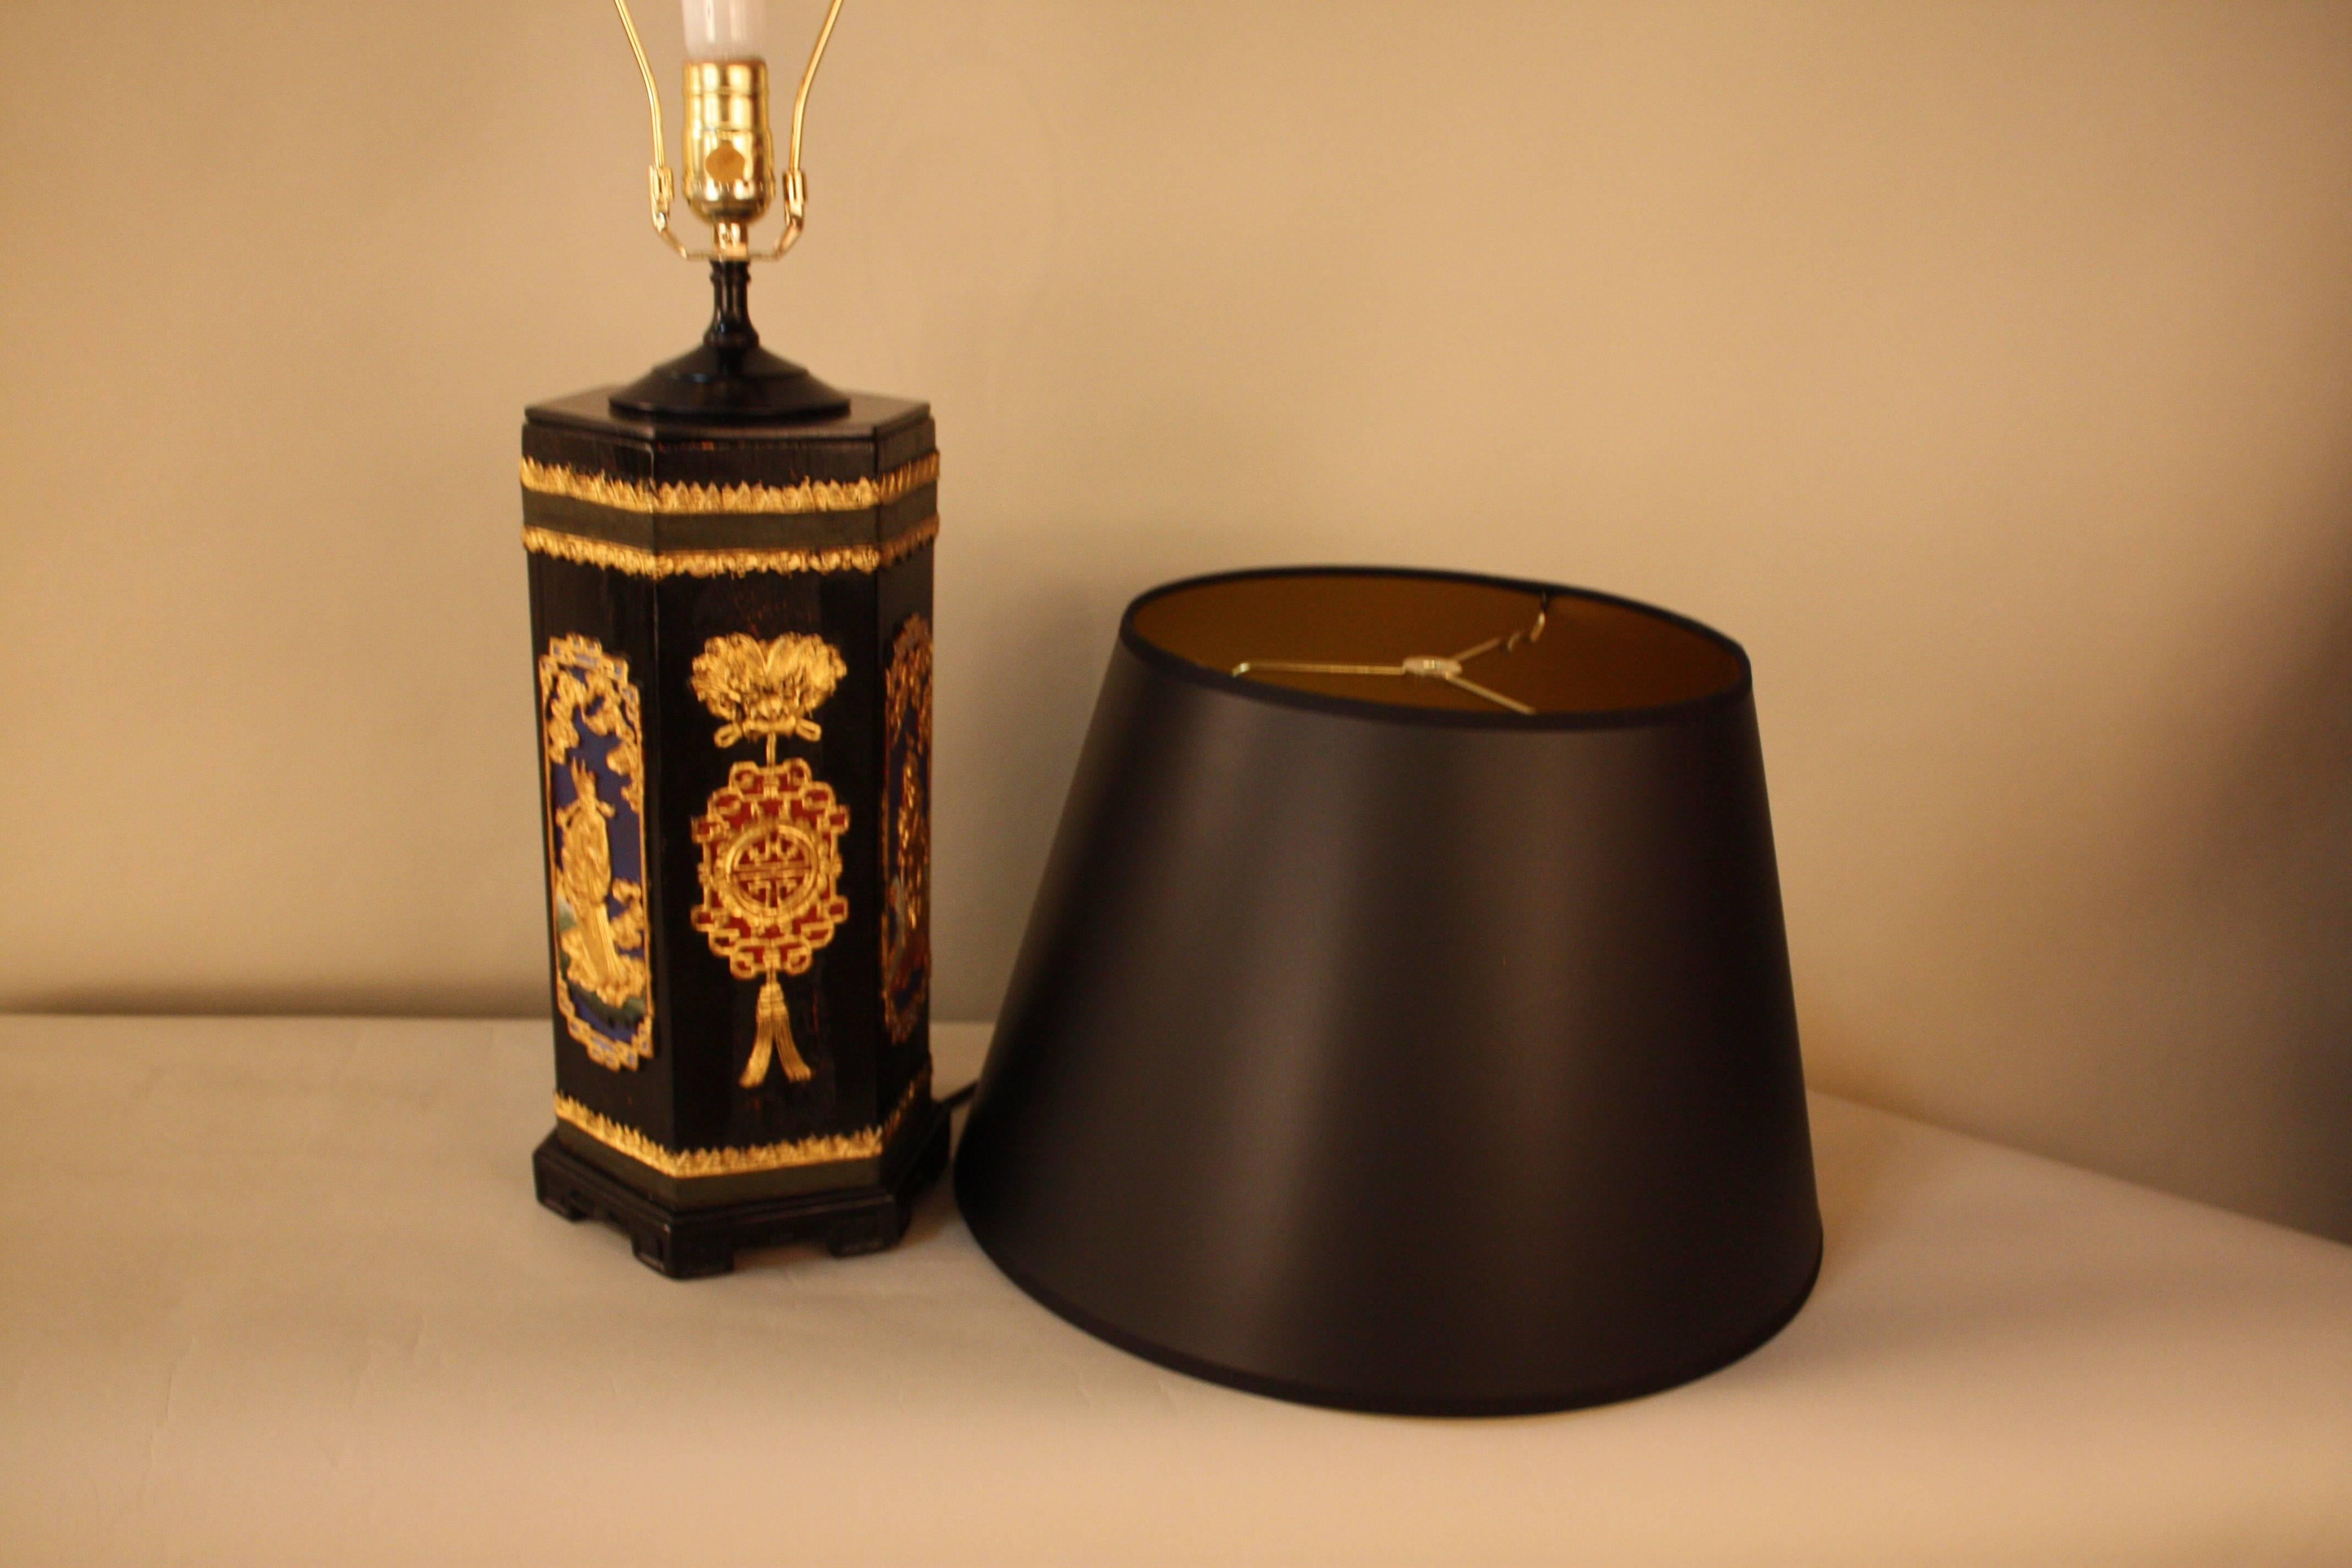 Carved gold leaf on black lacquer wood brush holder that has been customized to a table lamp.